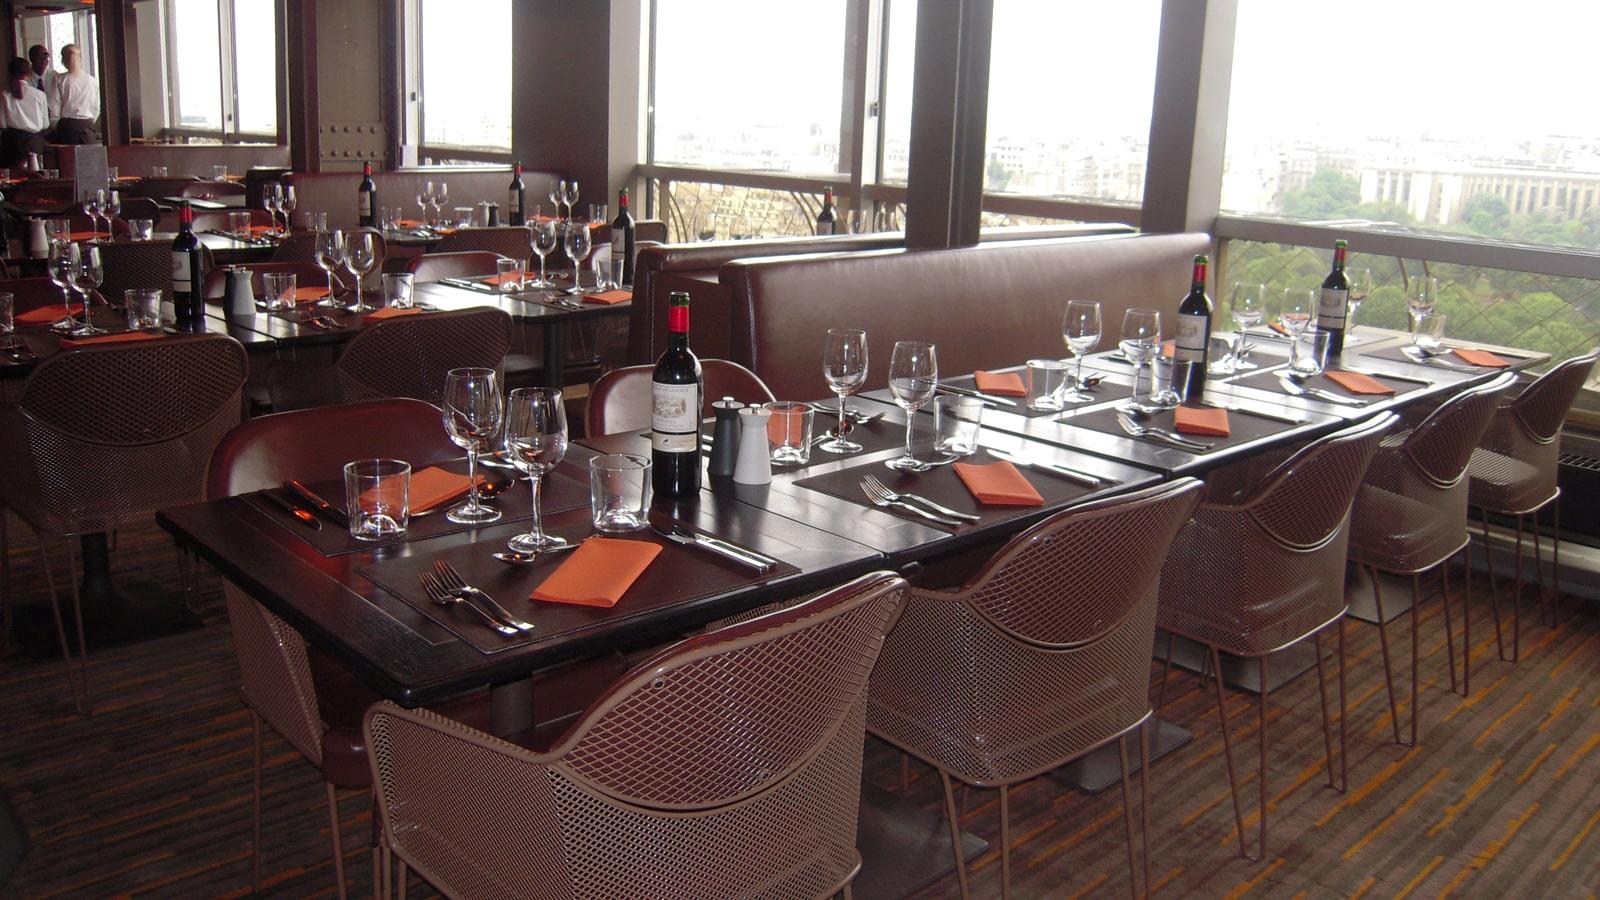 Tables with wine and glasses in the Eiffel Tower restaurant